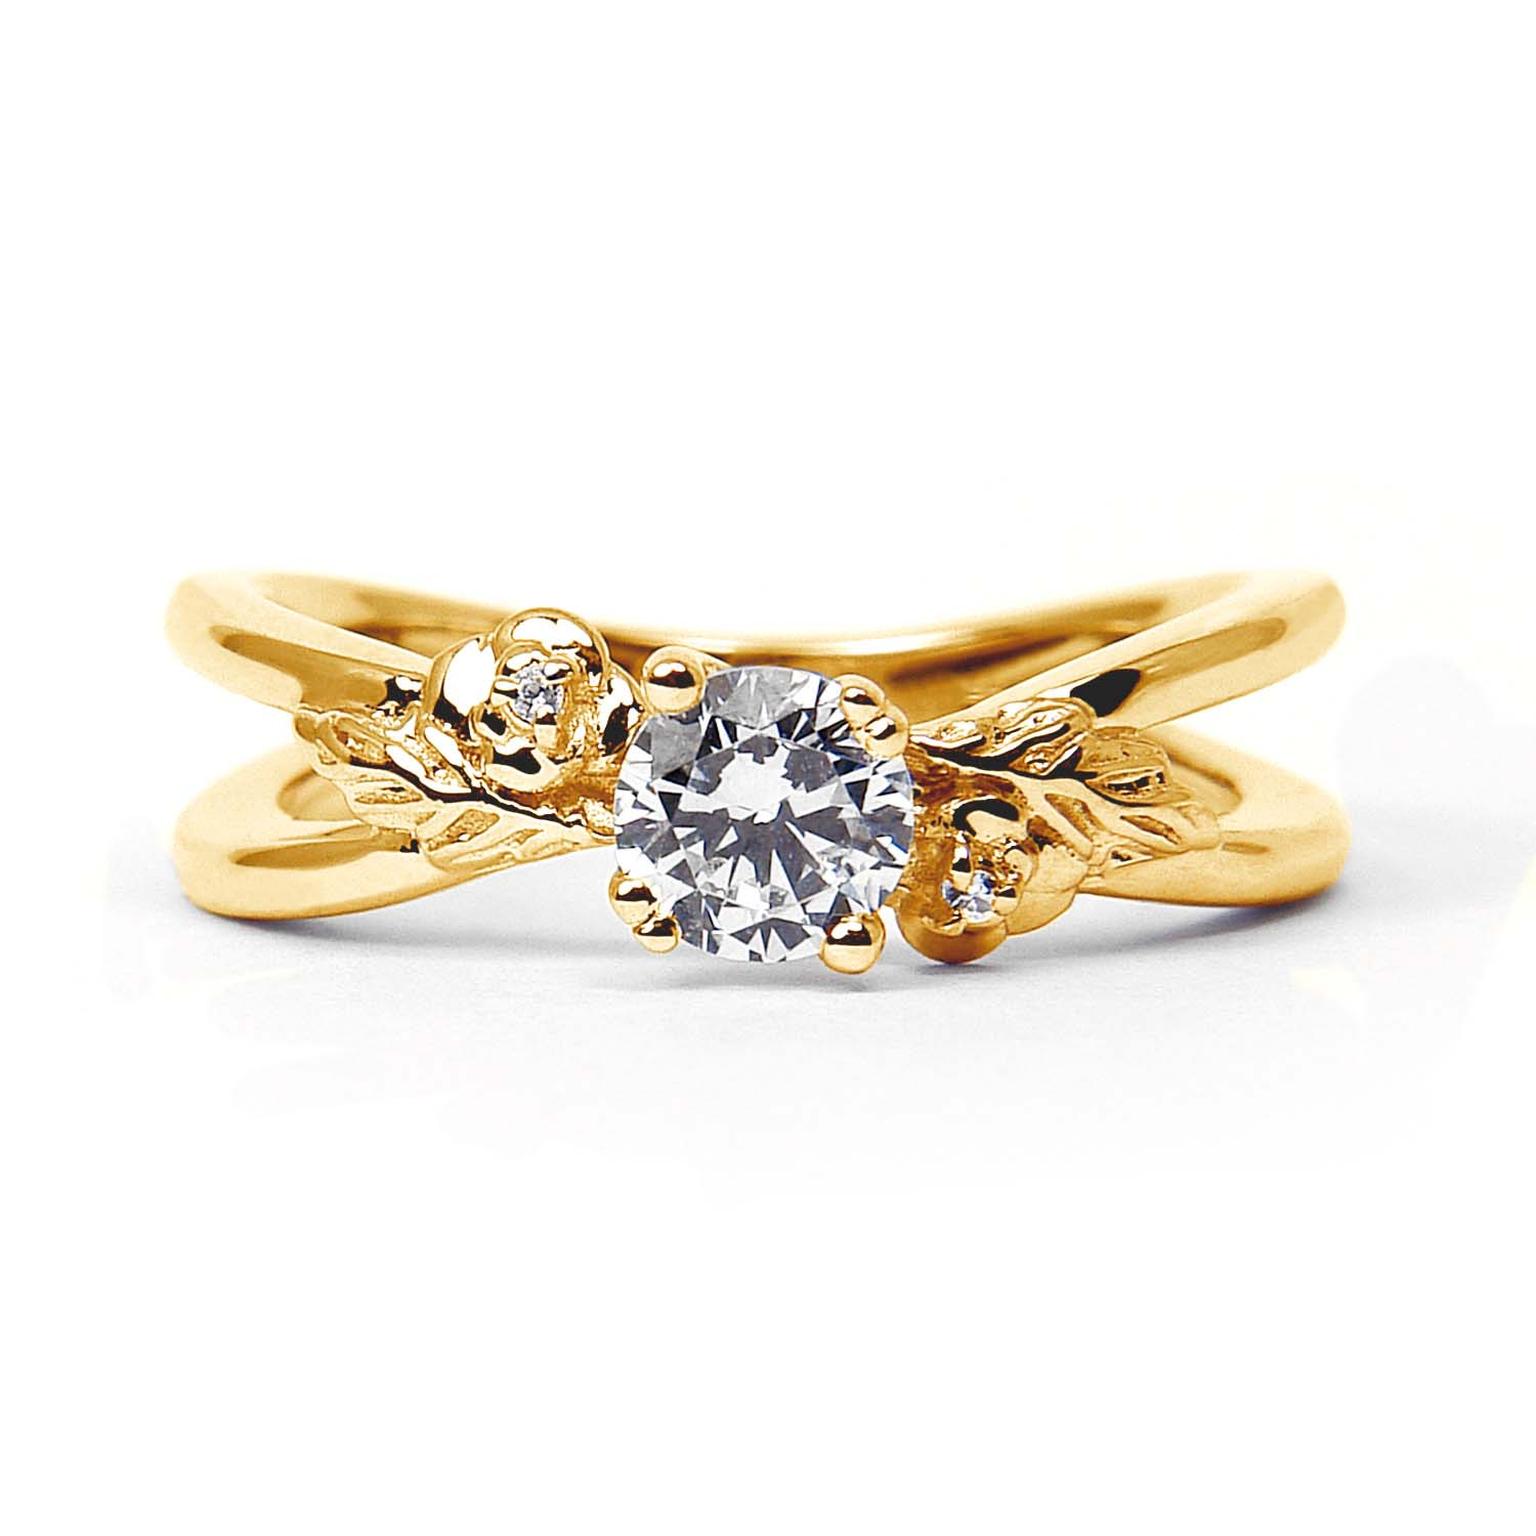 Arabel Lebrusan Foliage ethical diamond engagement ring featuring a Fairtrade yellow gold split band (from £2,340). From the Secret Garden collection.